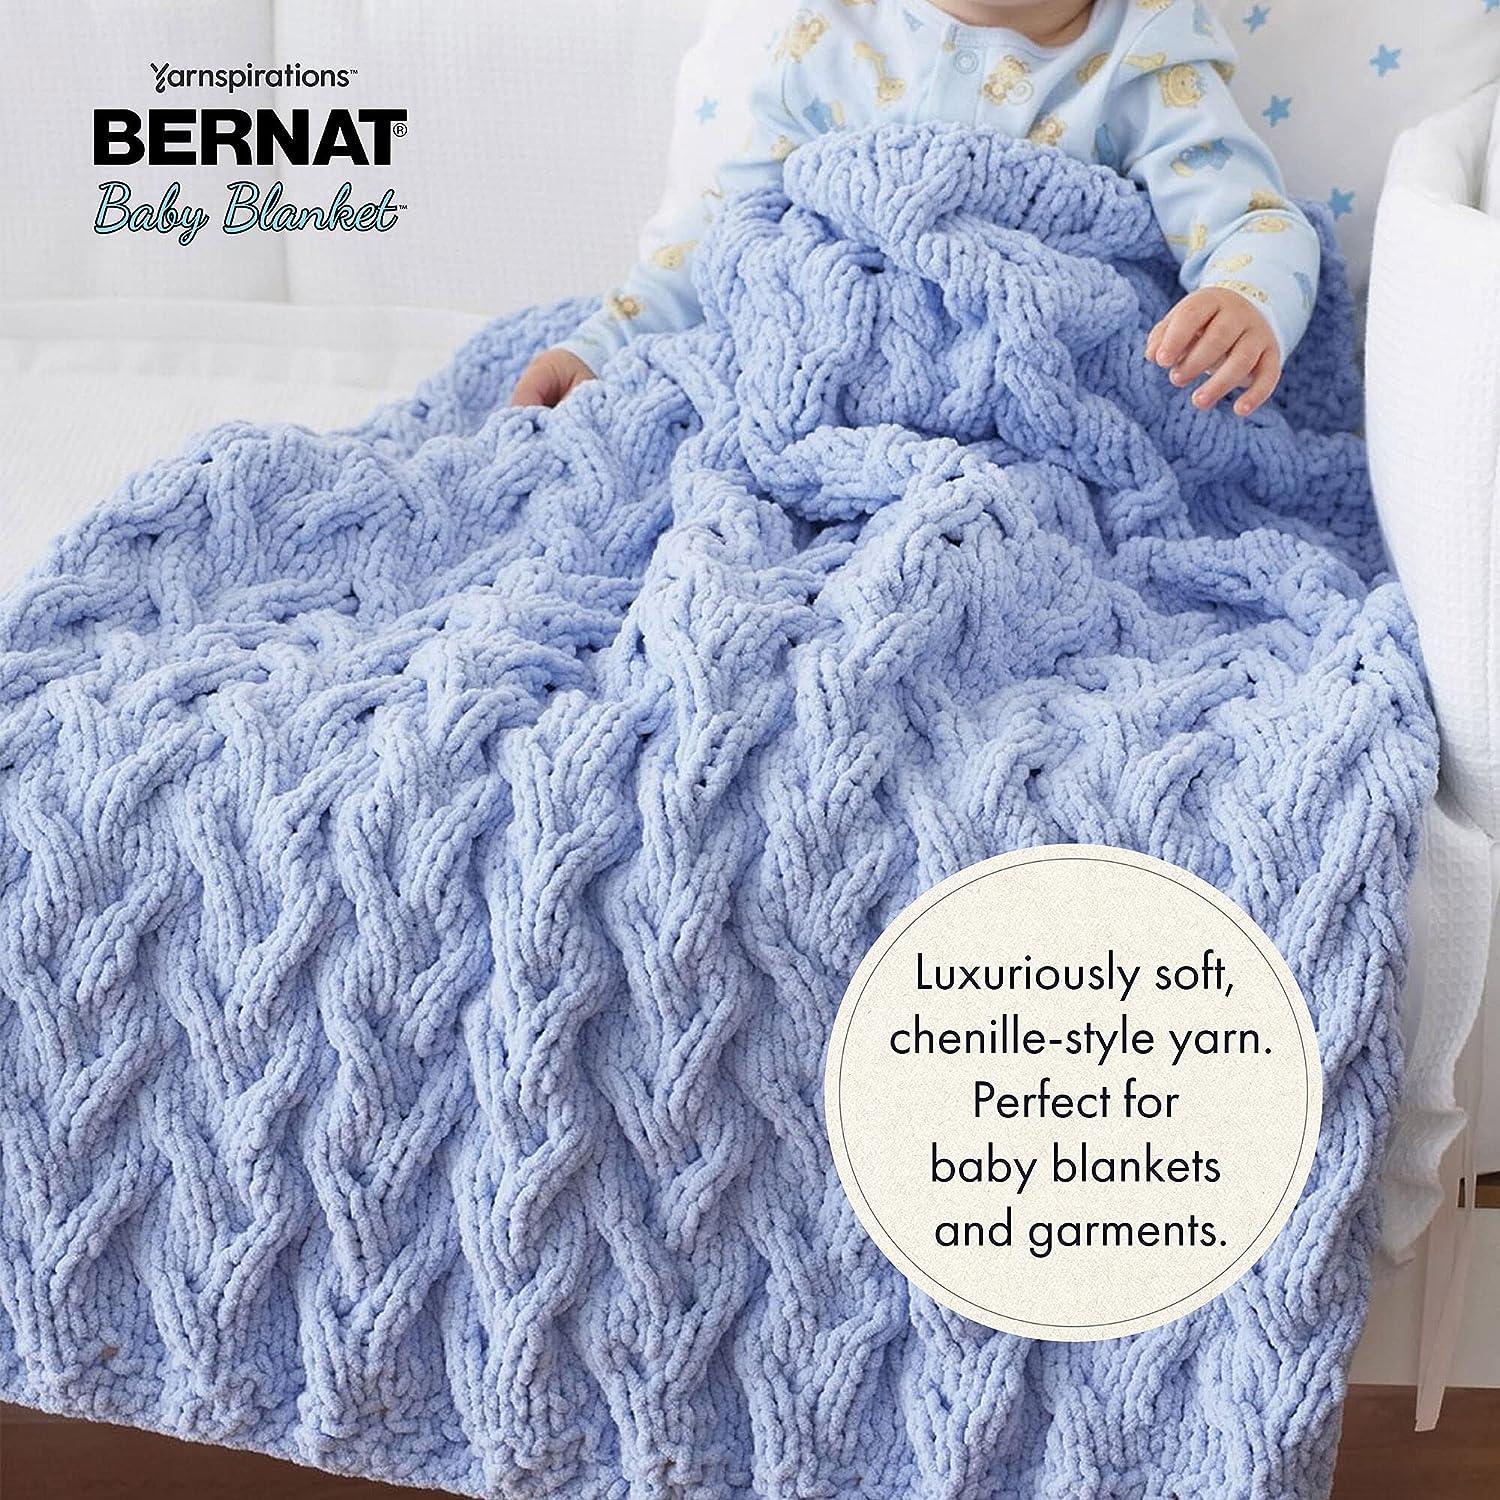 The softest yarn for baby blankets